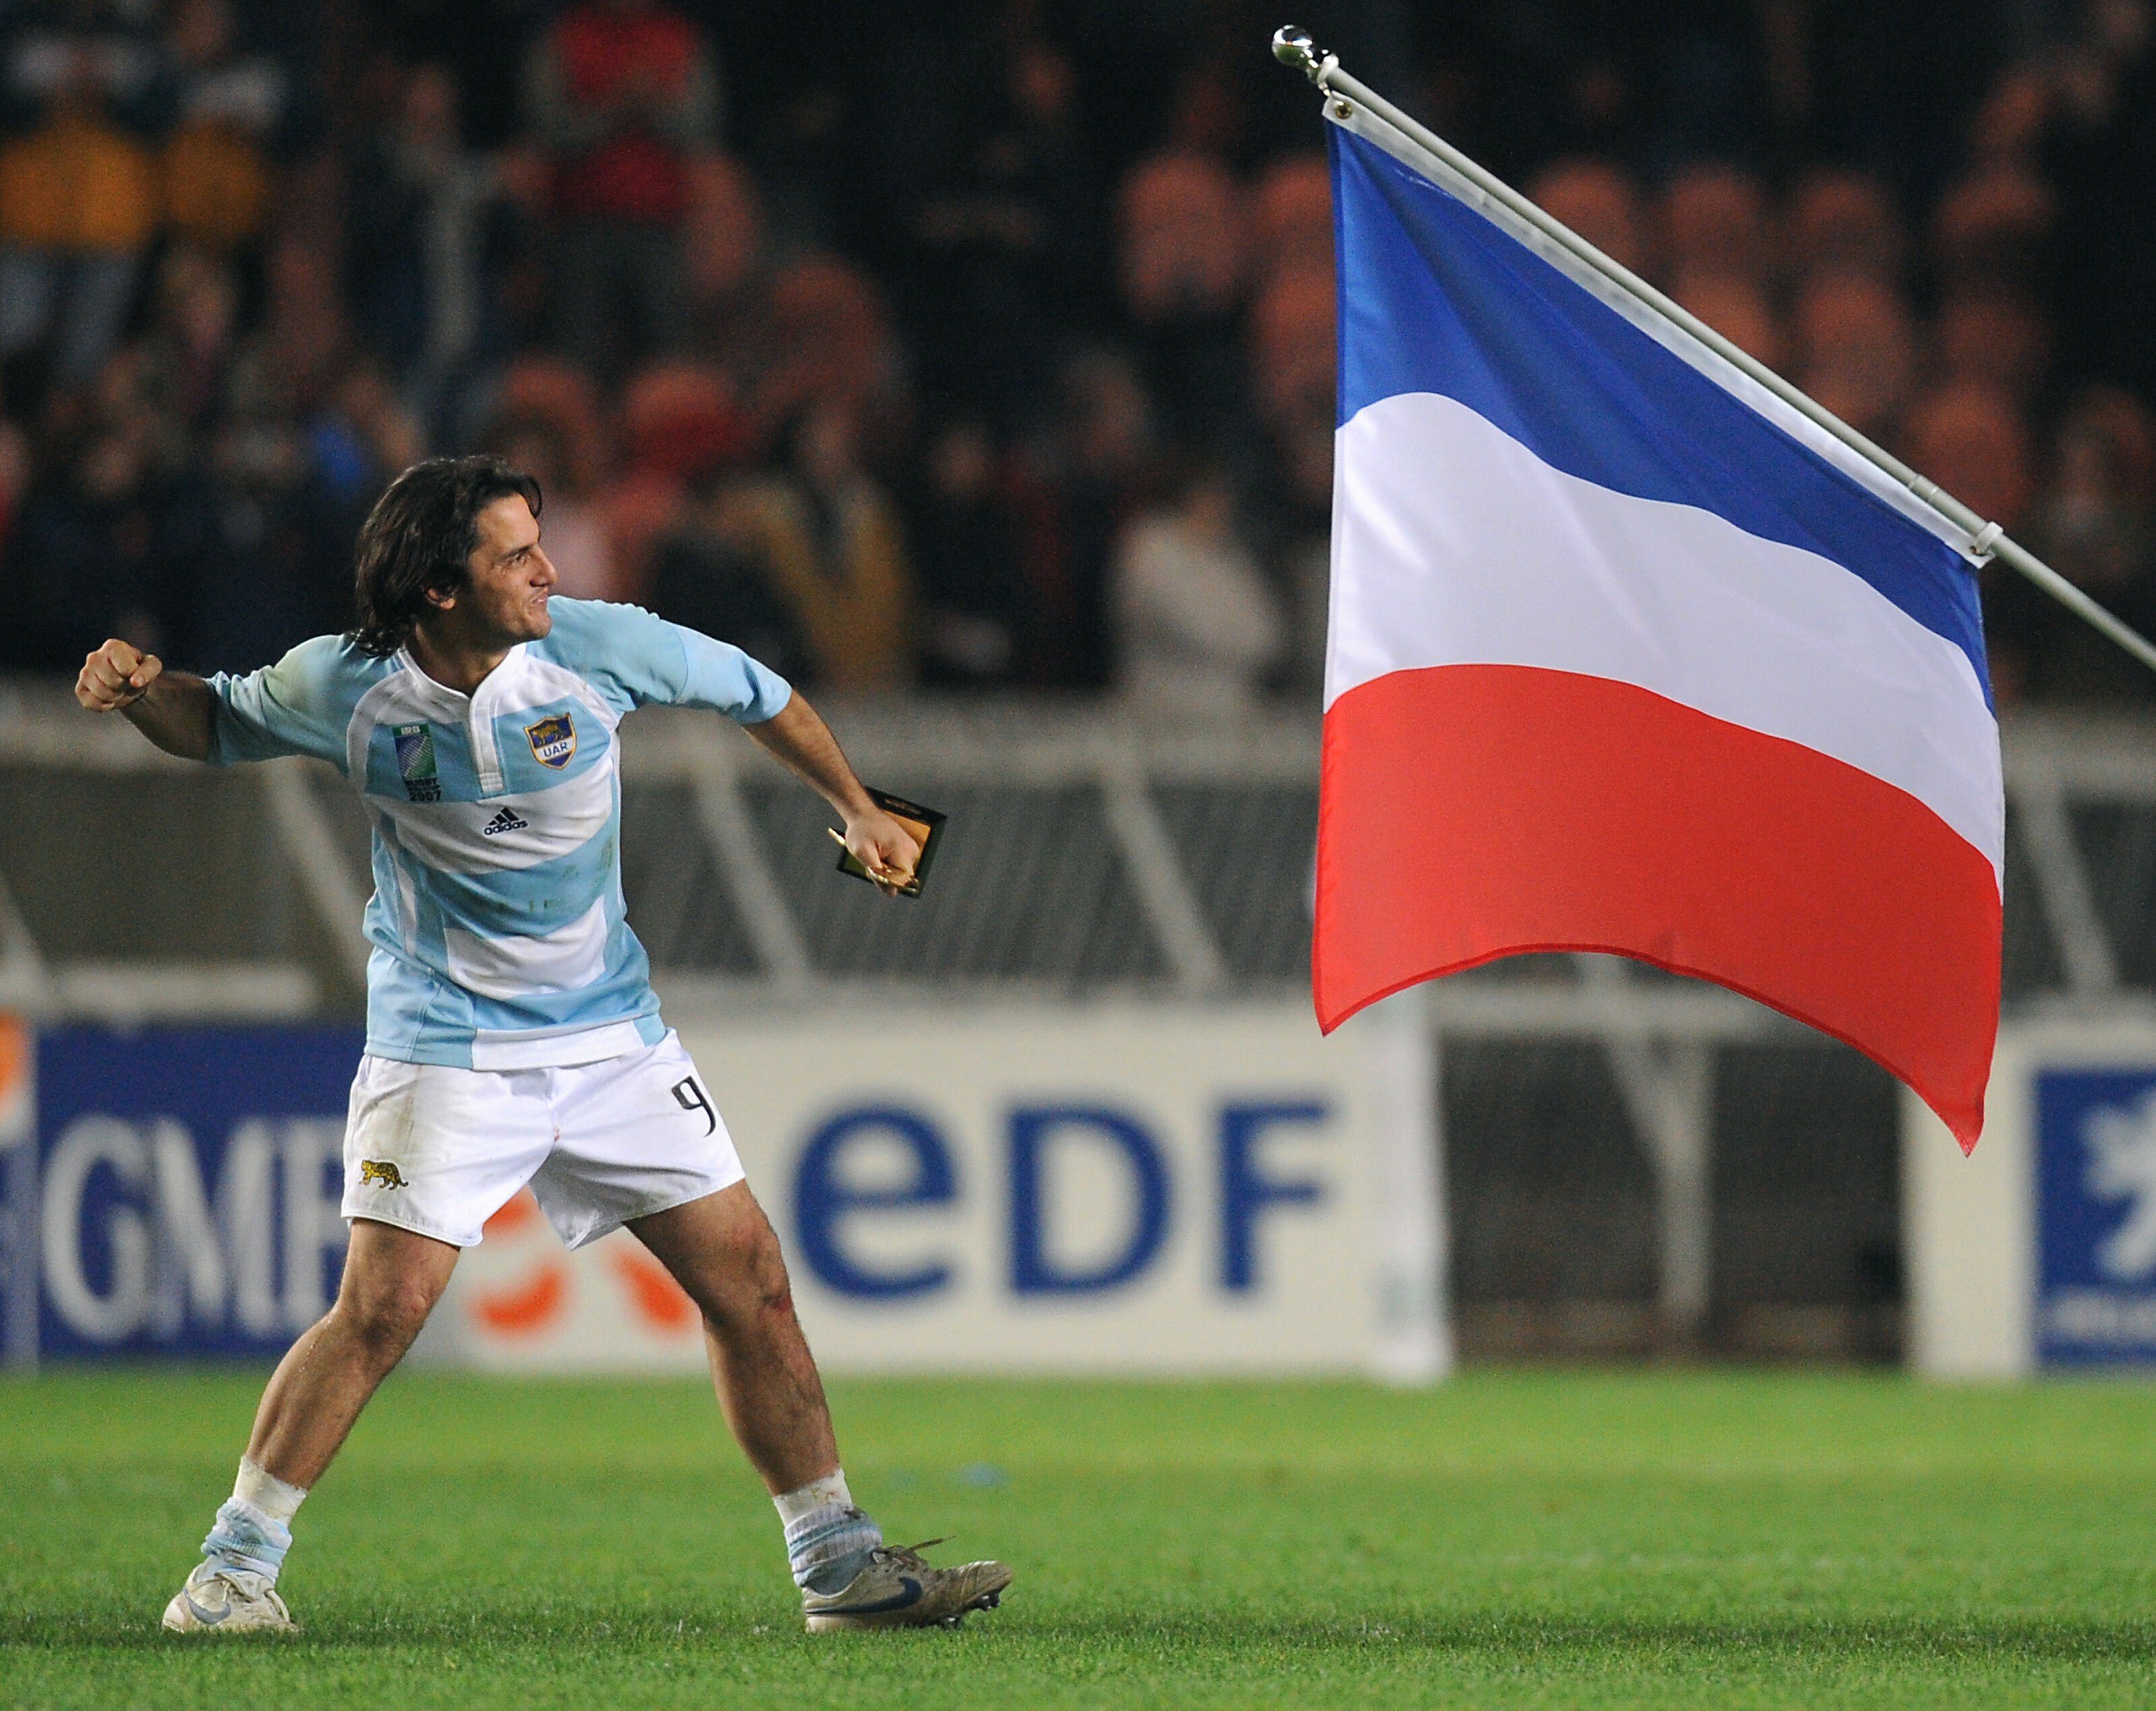 Captain Agustin Pichot celebrates after Argentina finishes third at the 2007 World Cup. Can he win the bid to become World Rugby chairman? Photo: Martin Bureau